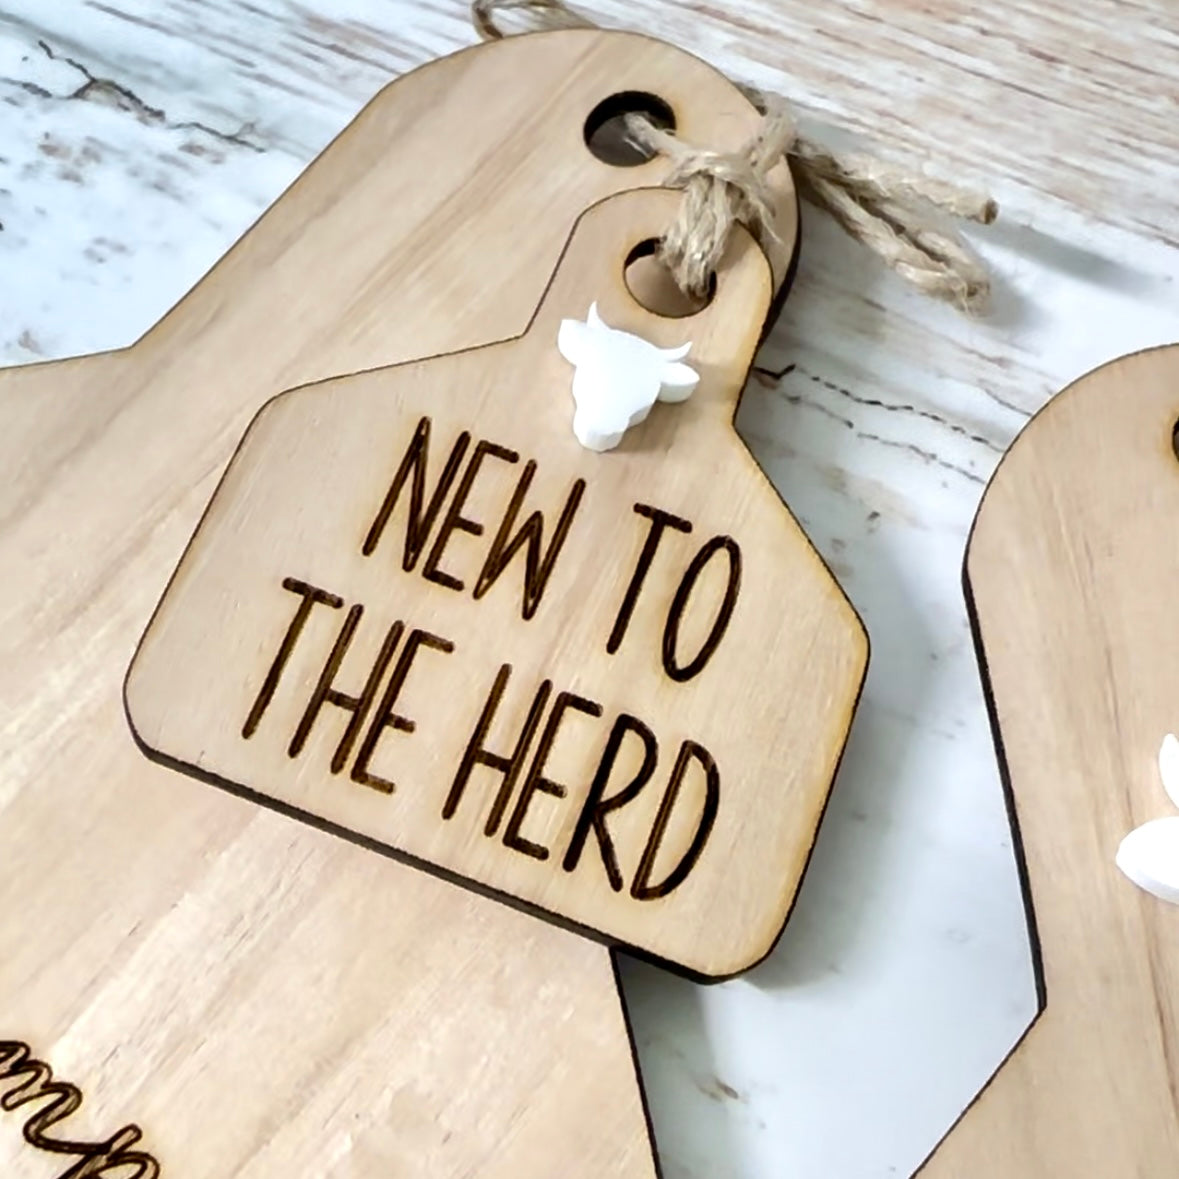 New To The Herd | Announcement Ear Tag